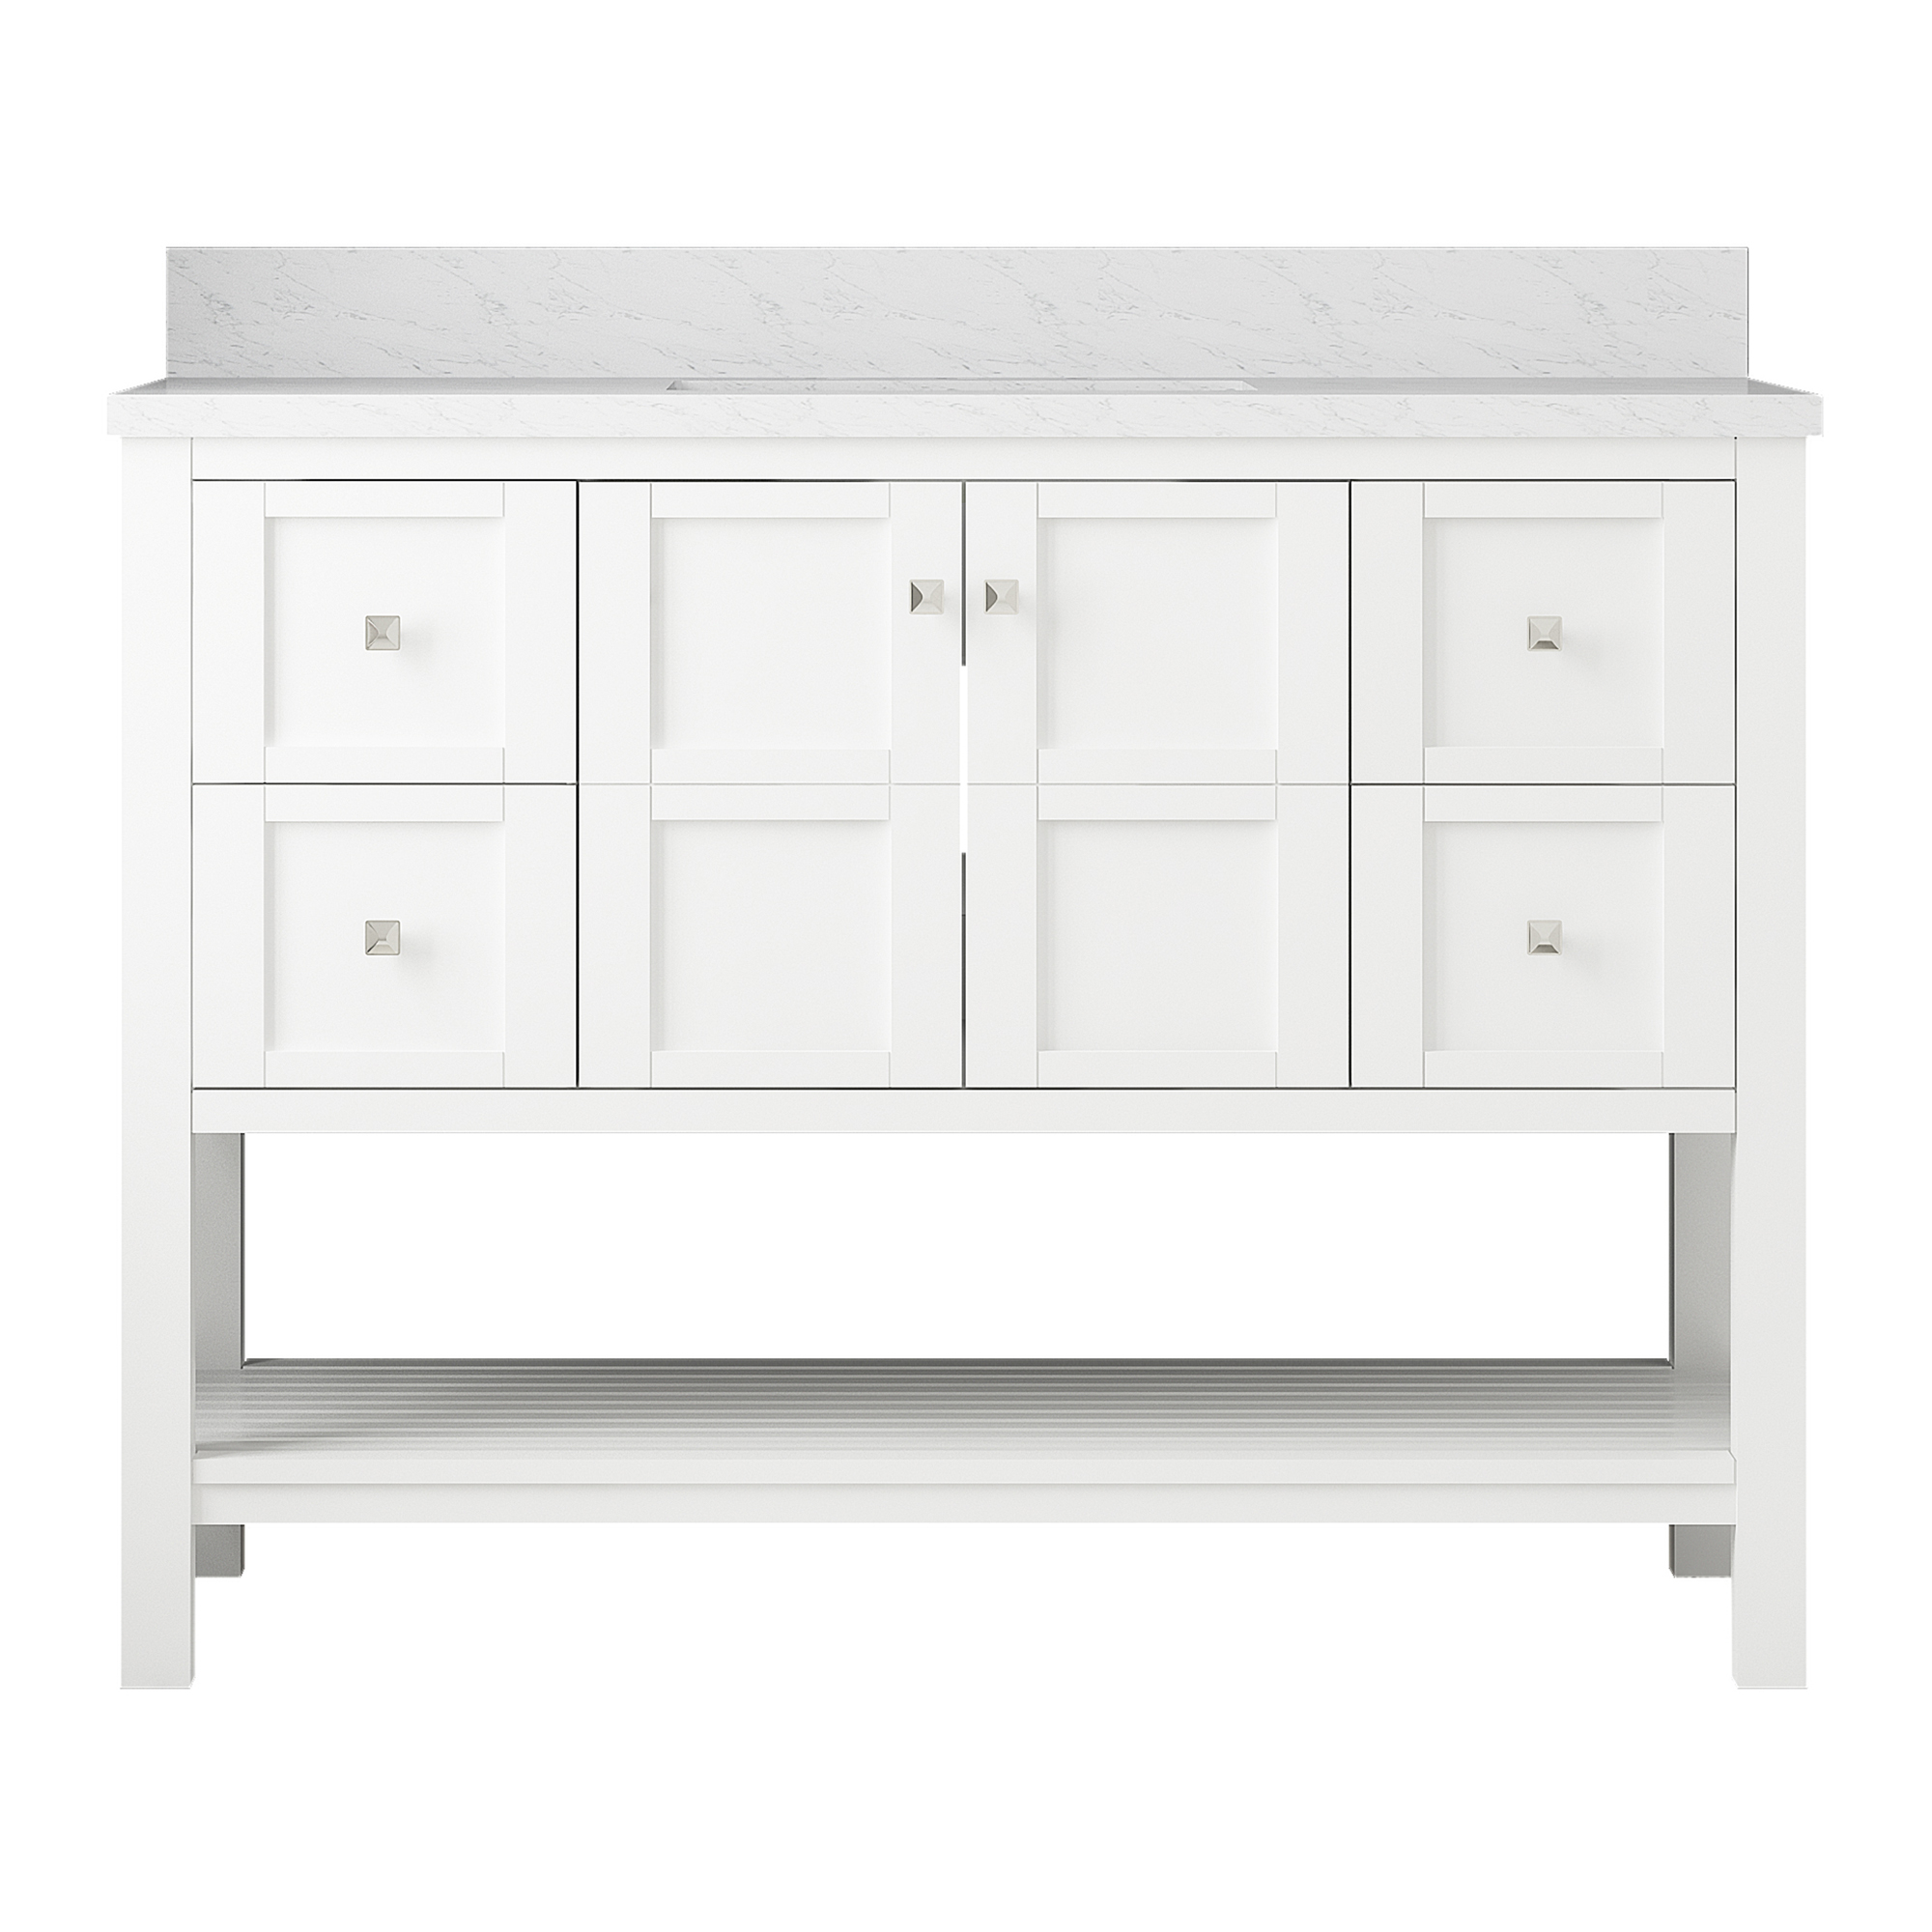 CASAINC Bathroom Vanity 48 x 22 x 35.4with 1.2" Thickness Countertop & Backsplash, Left Rectangular Sink, 2 Soft Closing Doors, 4 Dove Tail Drawer Construction, Soft Close Drawer Hinges, Gray, White (With Mirror)